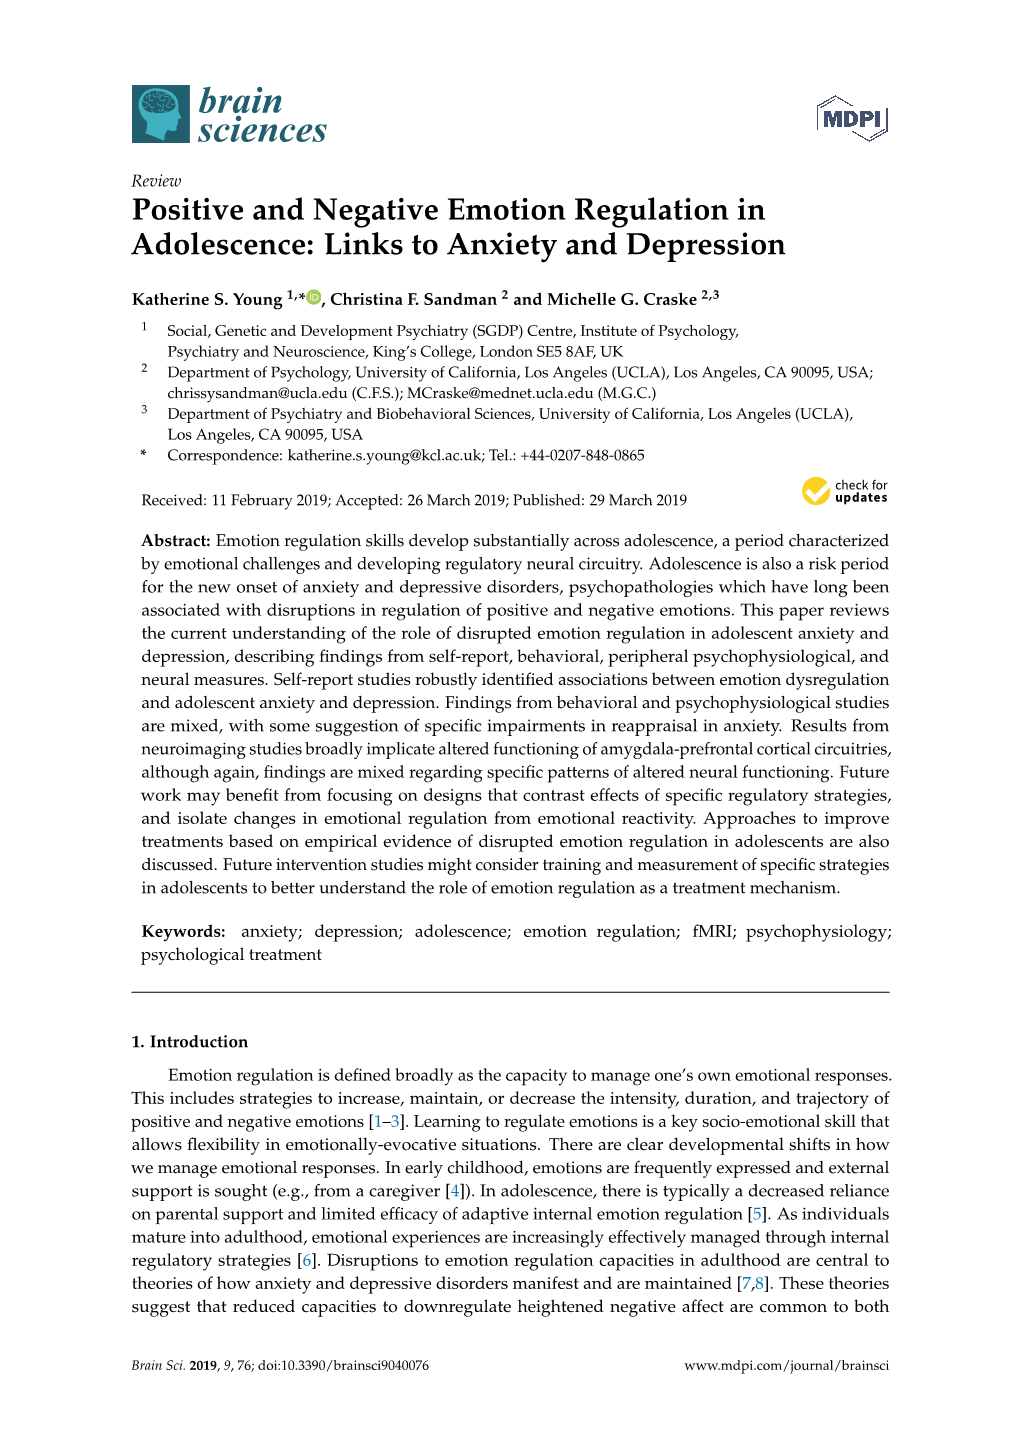 Positive and Negative Emotion Regulation in Adolescence: Links to Anxiety and Depression